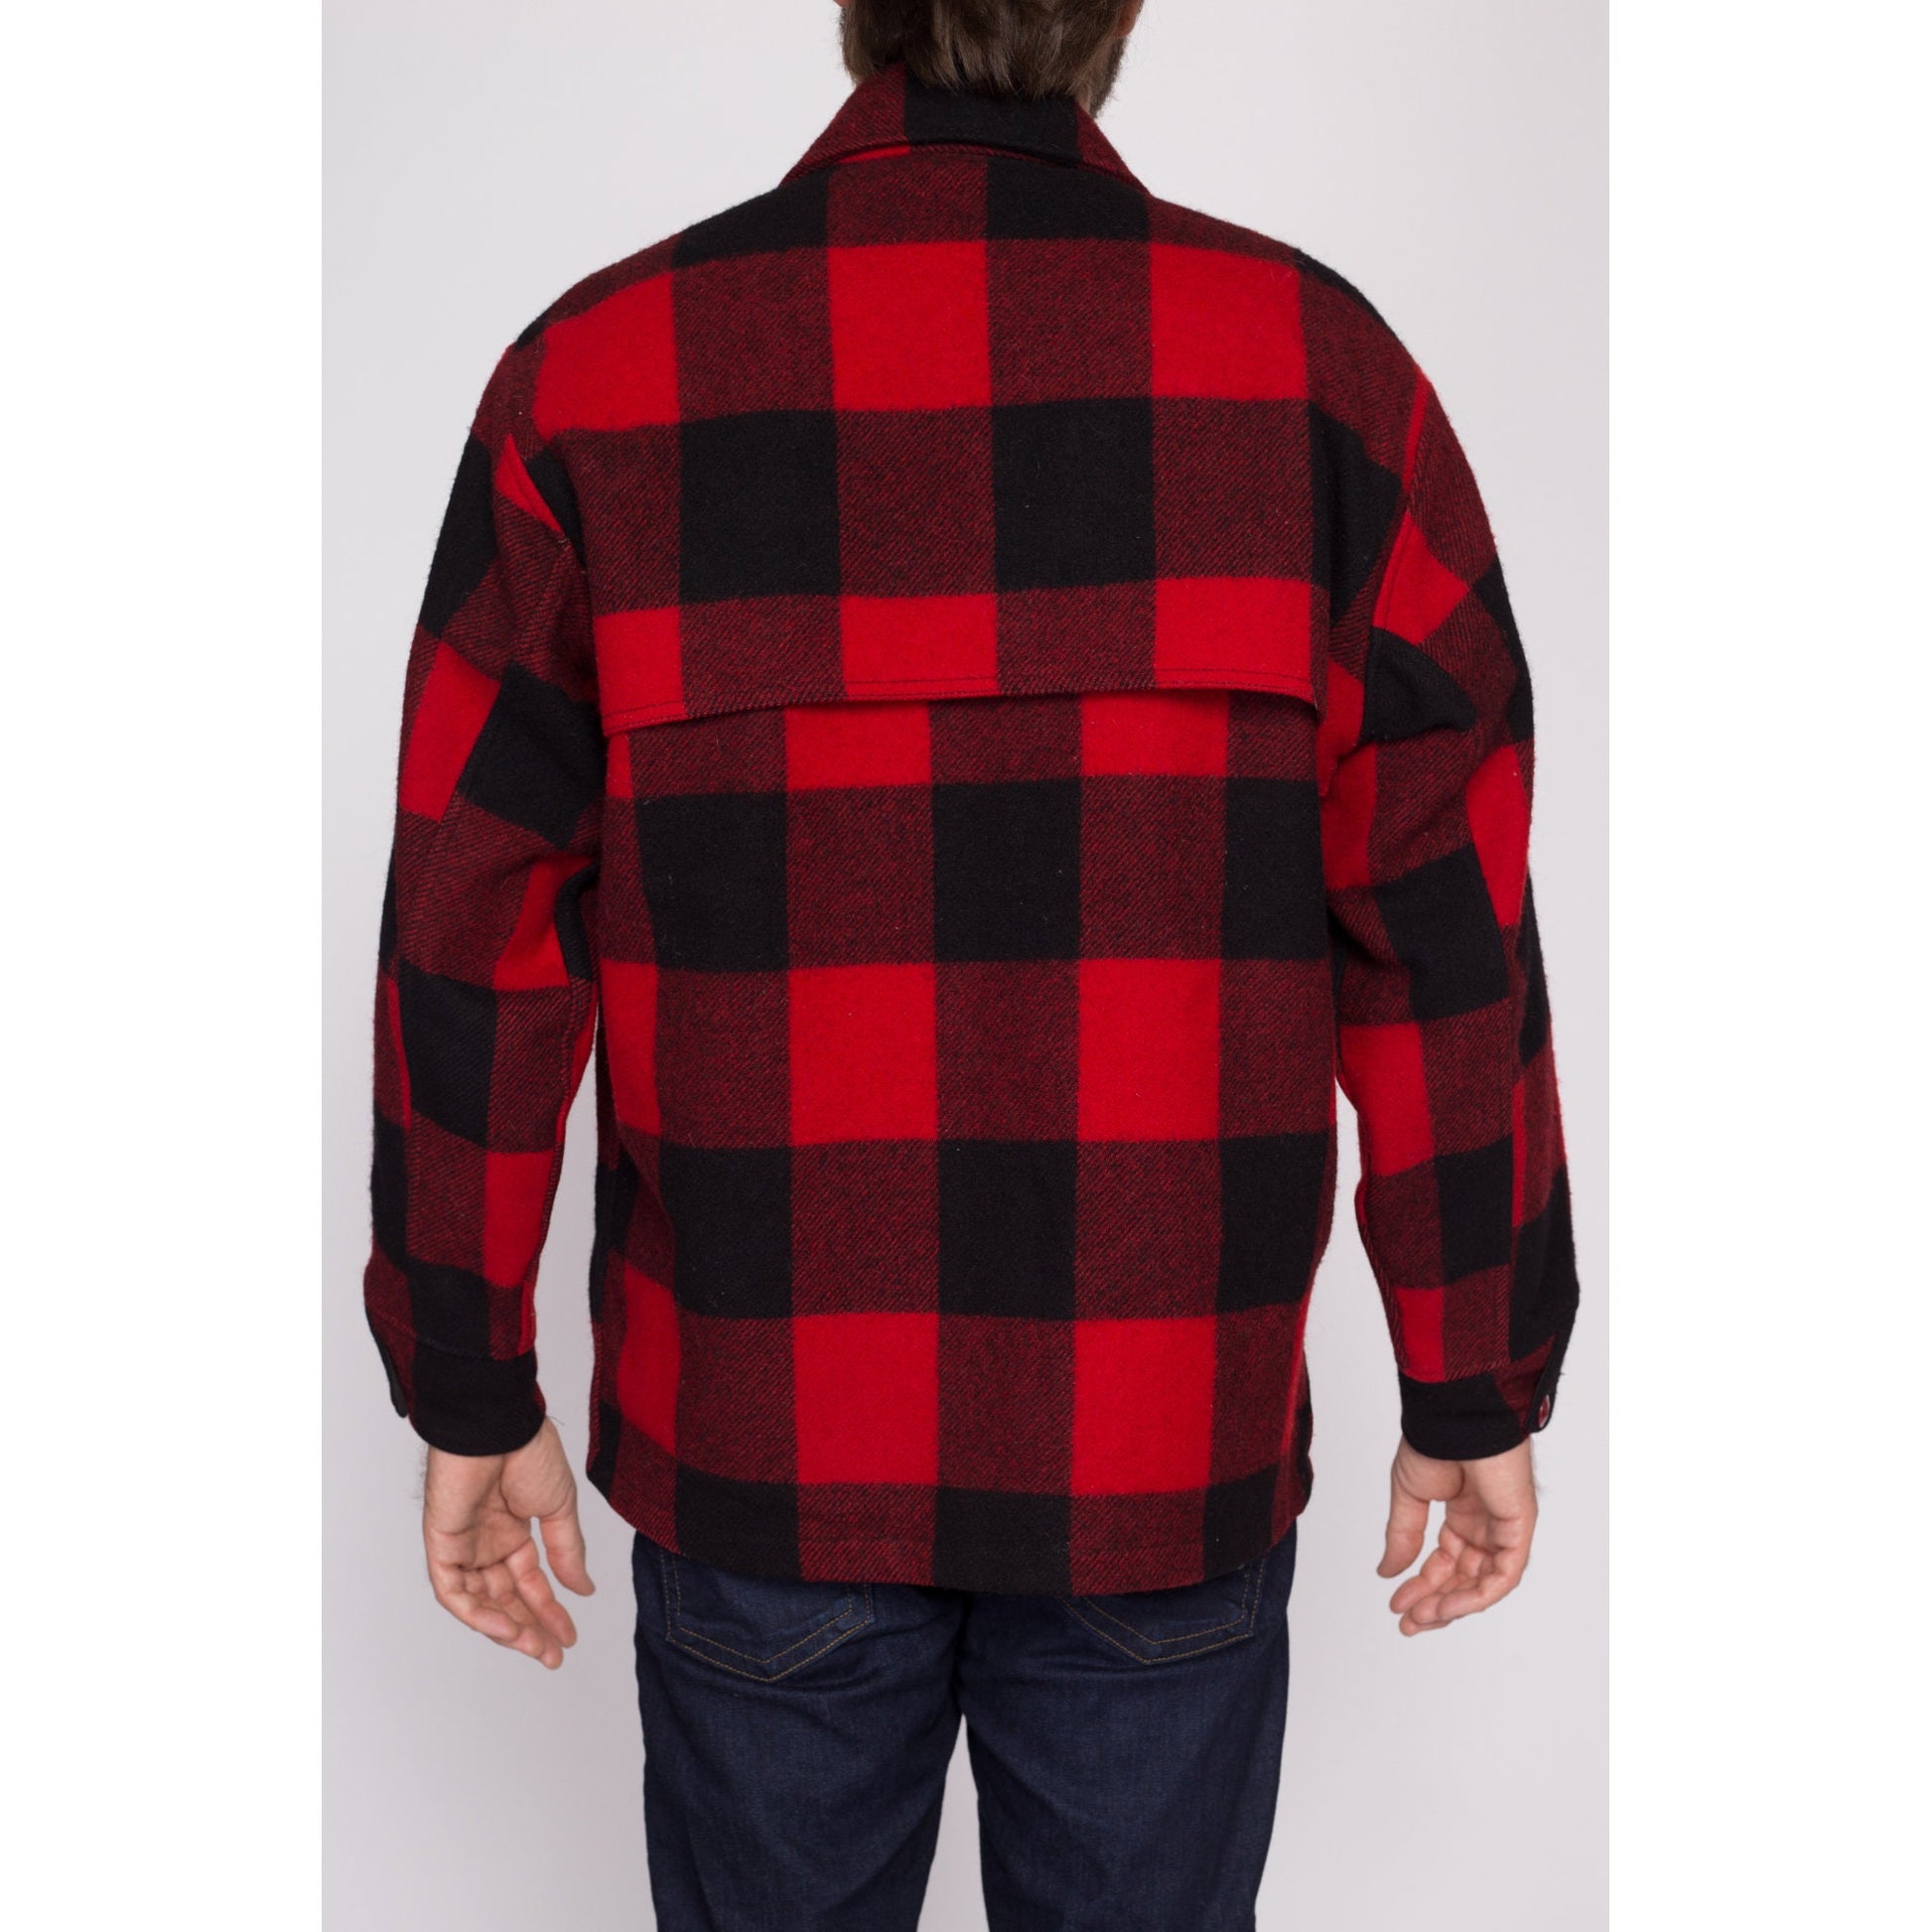 Large 70s Woolrich Buffalo Plaid Jacket Size 44 | Vintage Red & Black Zip Up Hunting Field Coat